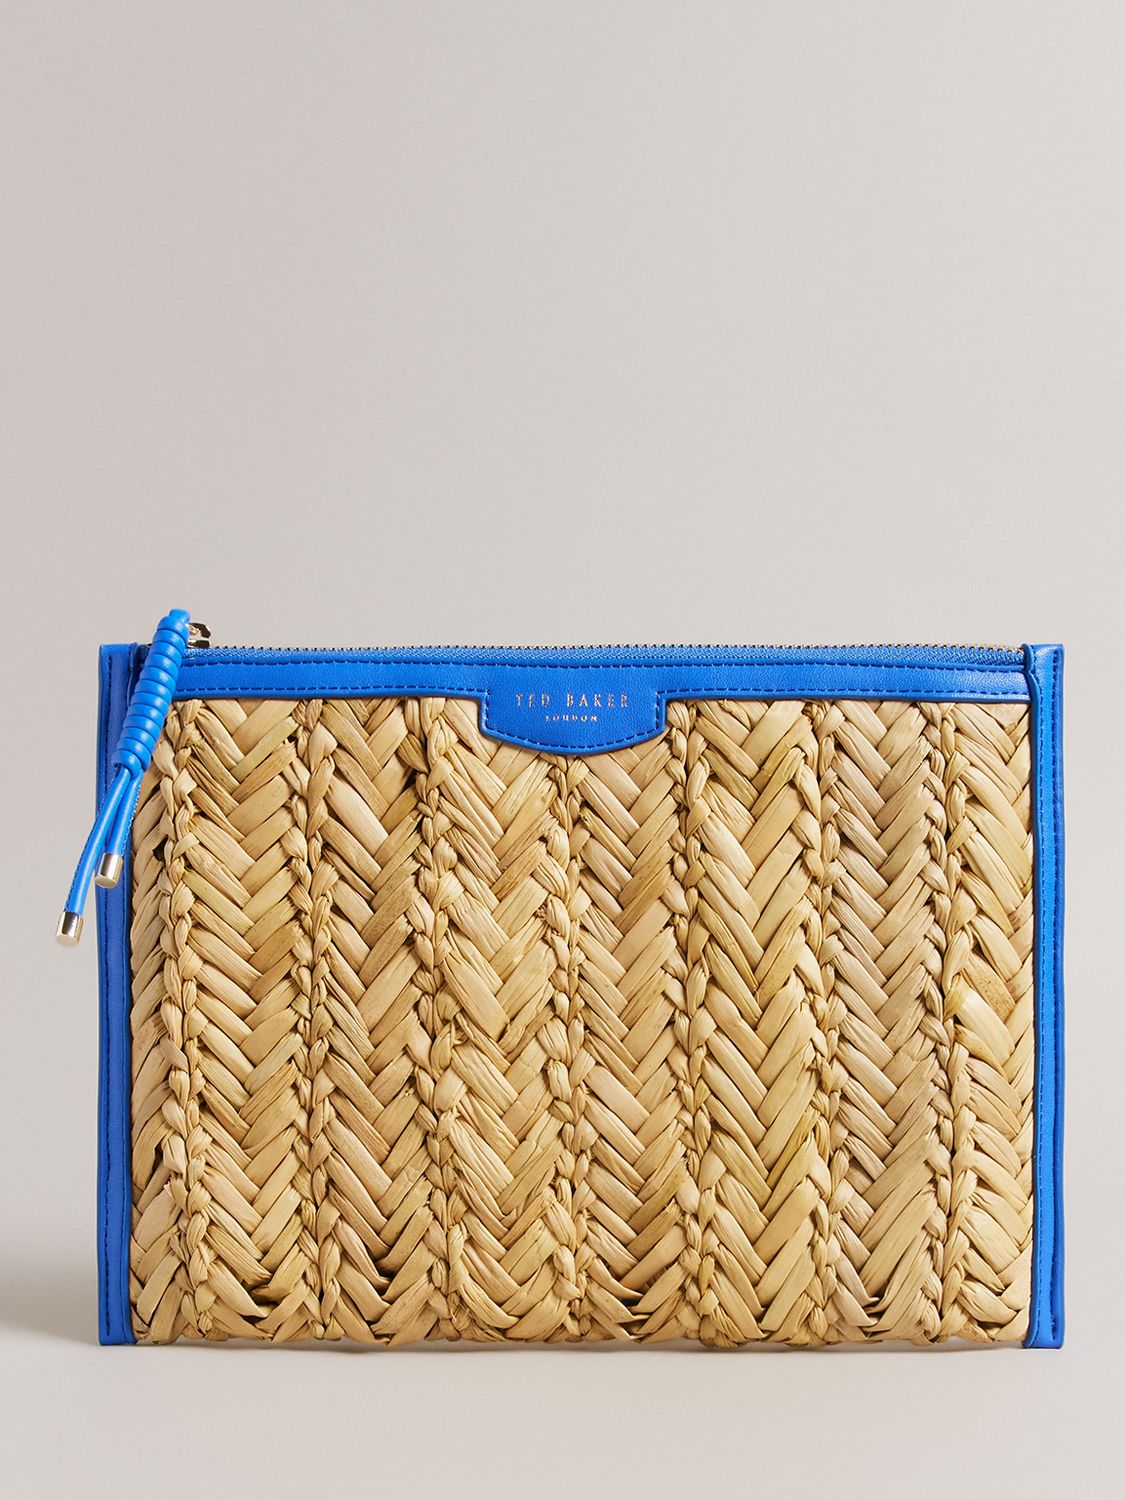 Ted Baker Ivelin Woven Seagrass Clutch Bag, Bright Blue, One Size